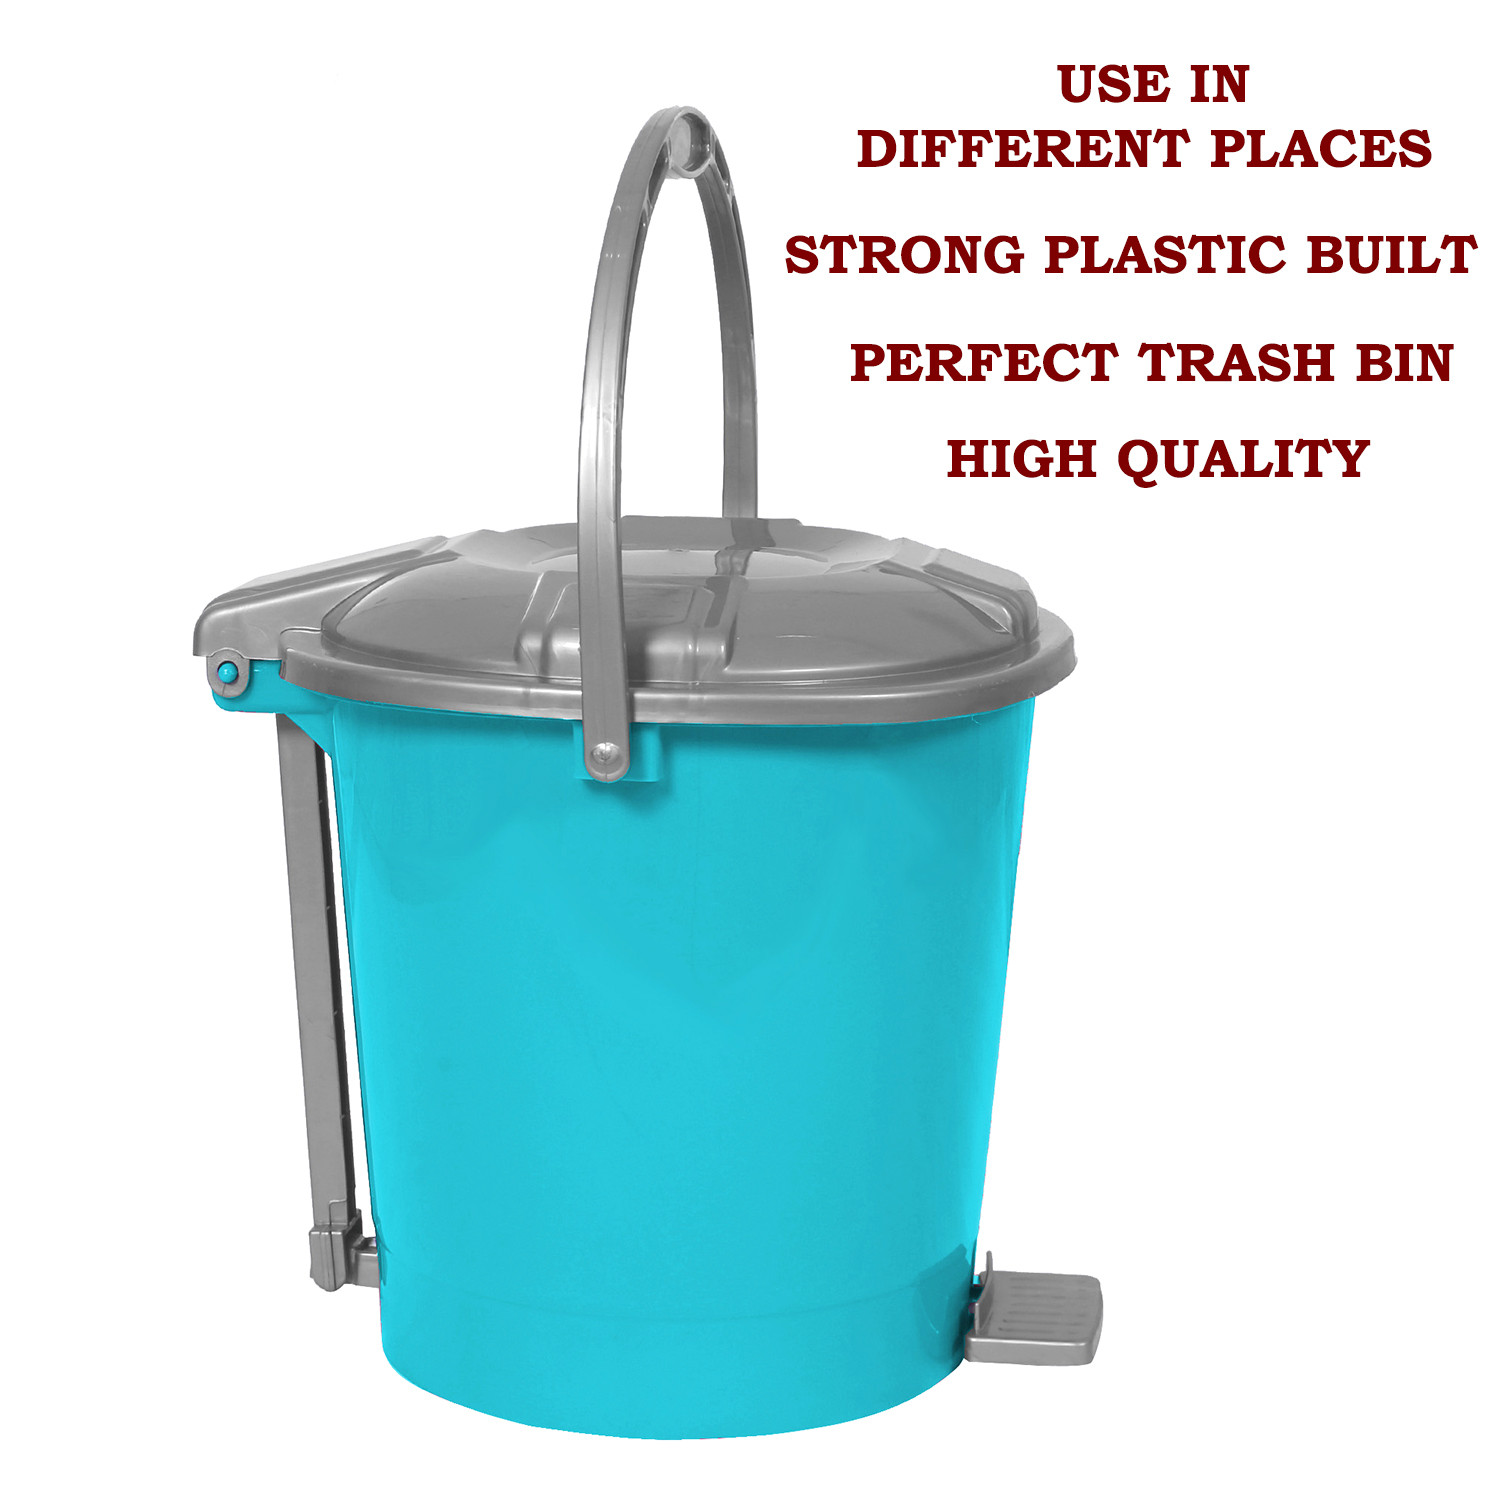 Kuber Industries Durable Plastic Pedal Dustbin|Waste Bin|Trash Can For Kitchen & Home With Handle,10 Litre,Pack of 2 (Sky Blue & Black)